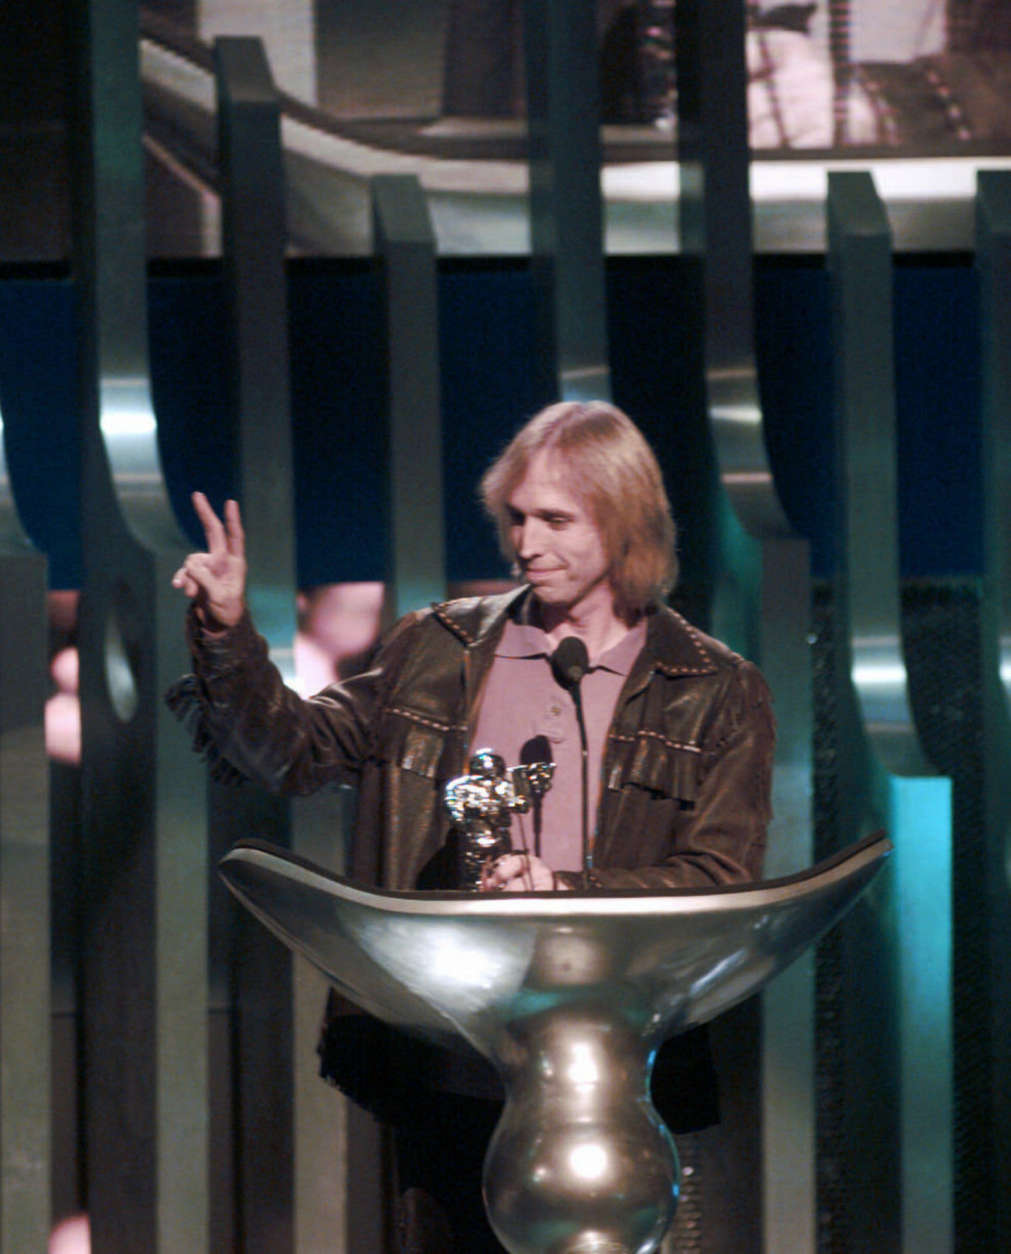 Tom Petty makes a peace sign after winning the award for Best Male Video during the 1995 MTV Video Music Awards at Radio City Music Hall in New York Thursday, September 7, 1995.  (AP Photo/ Bebeto Matthews)